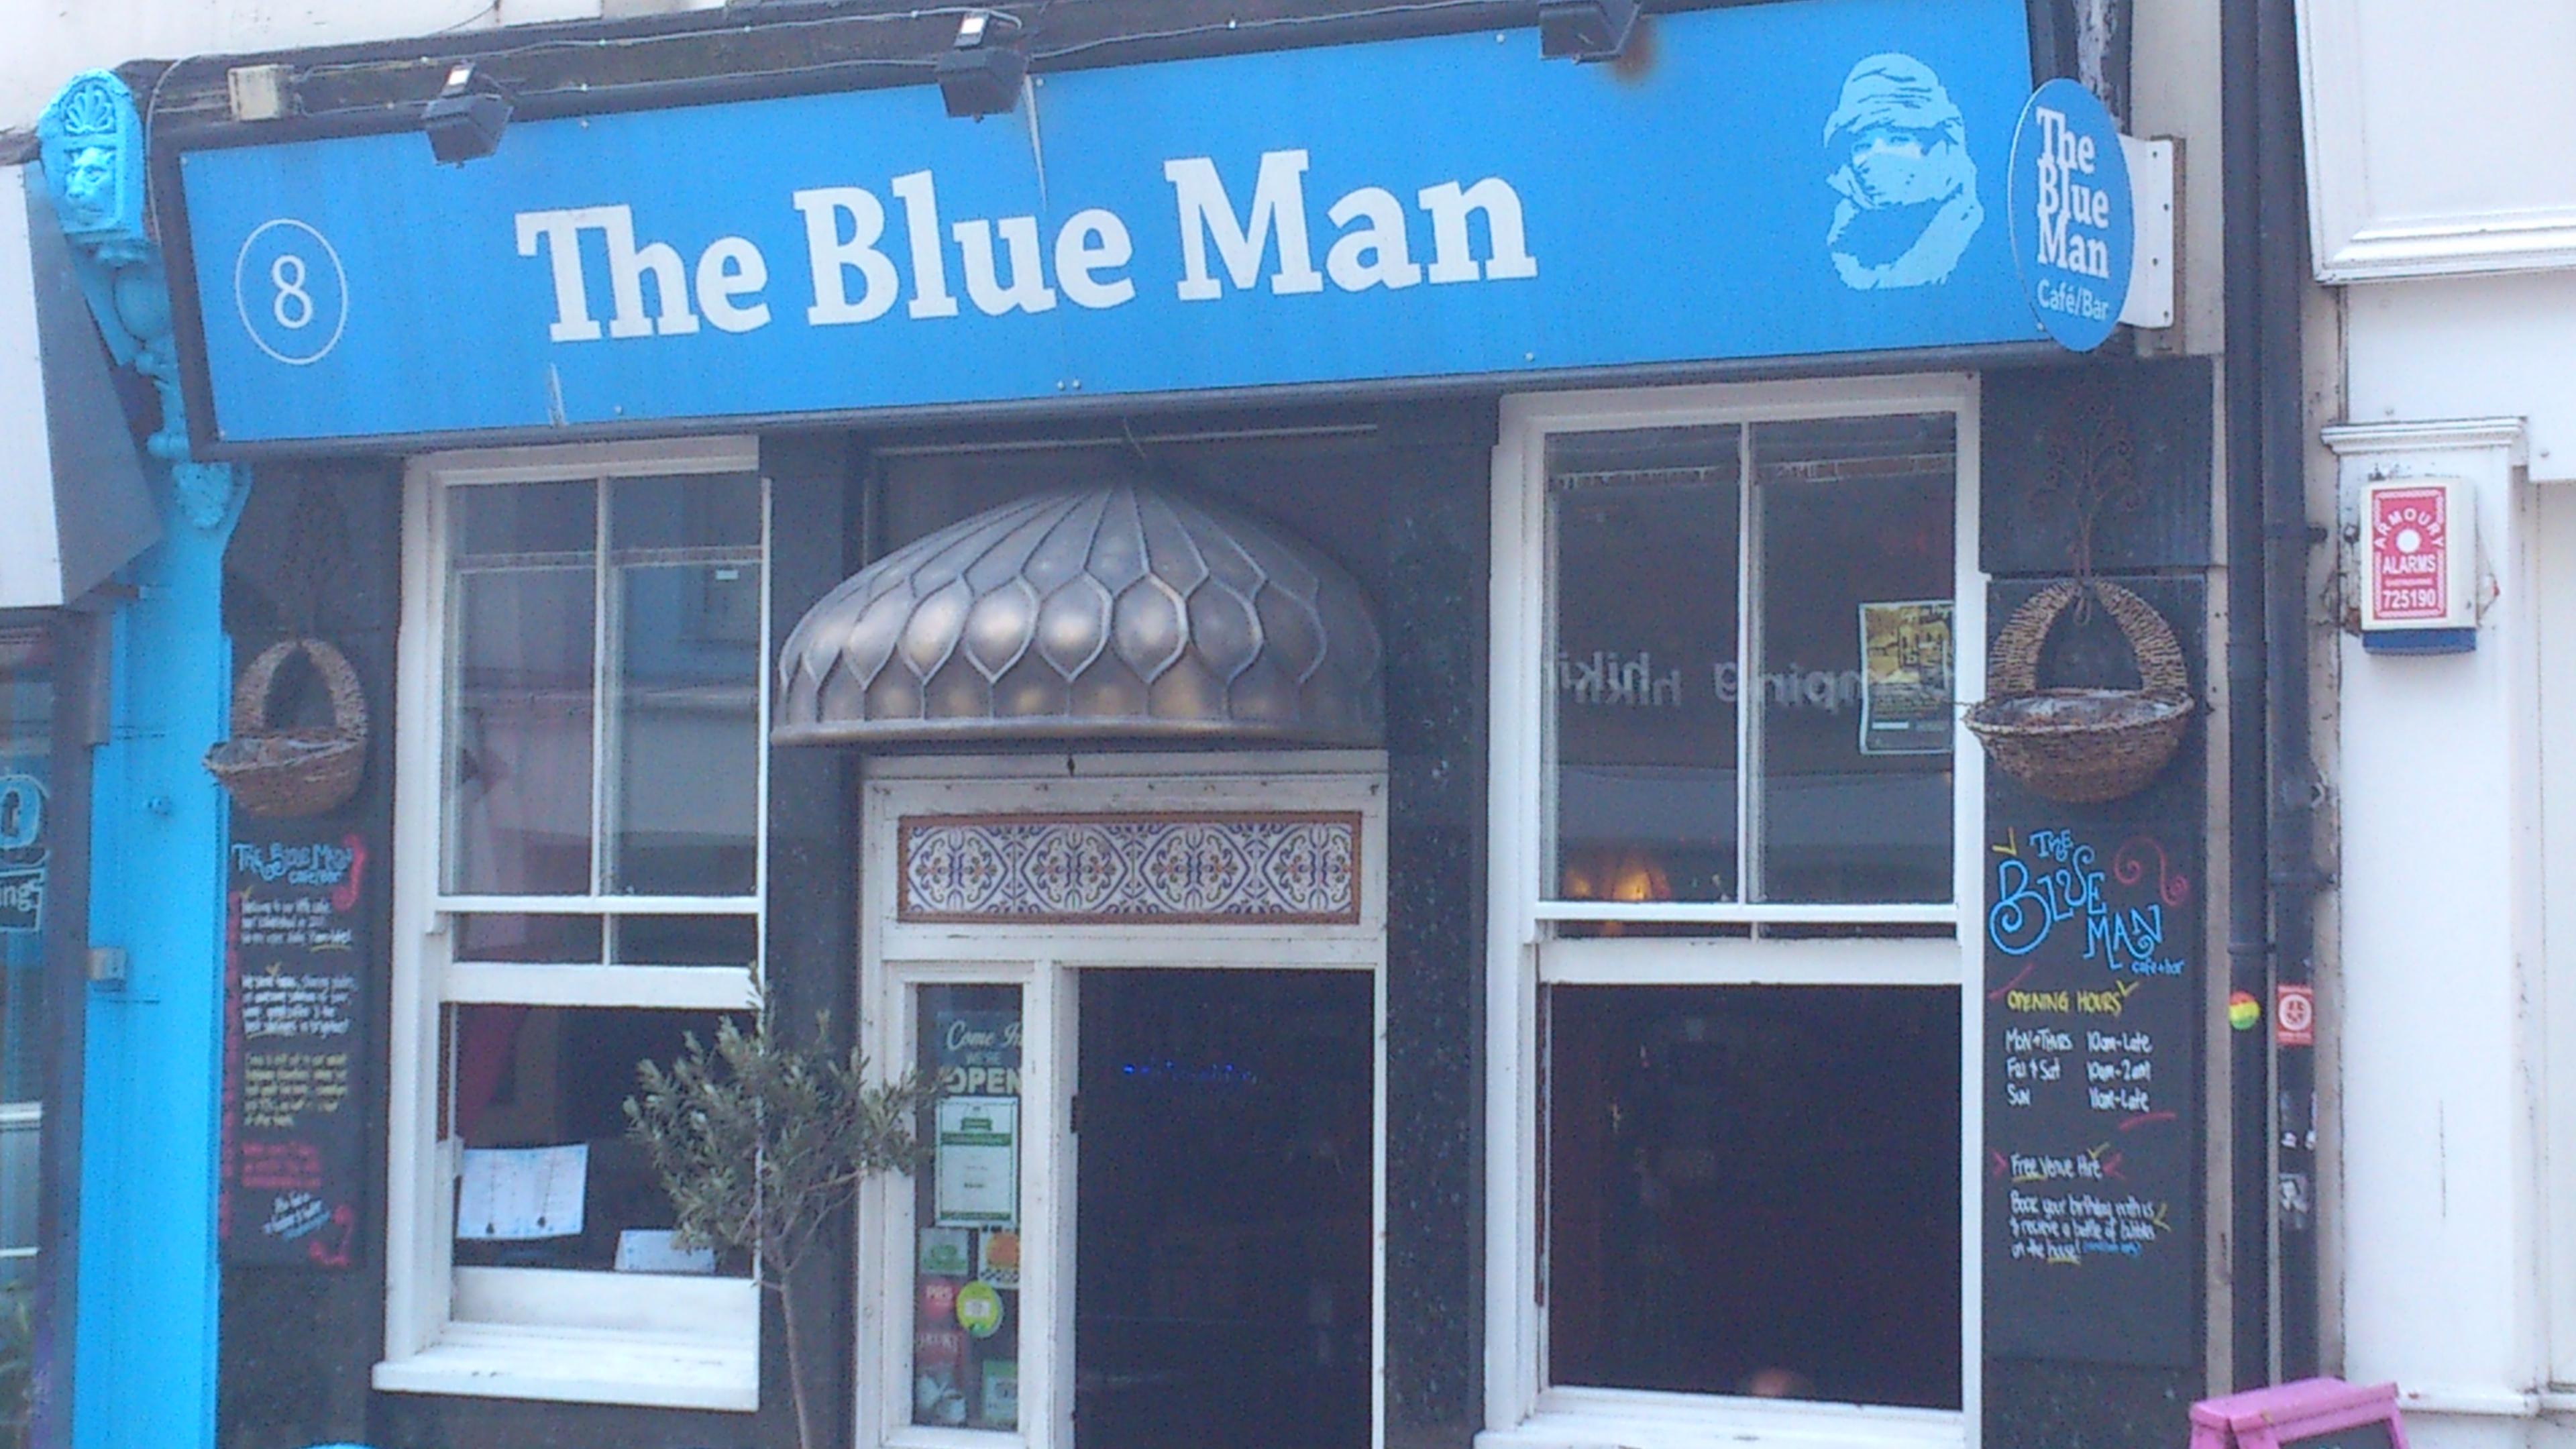 Cover image of this place The Blue Man